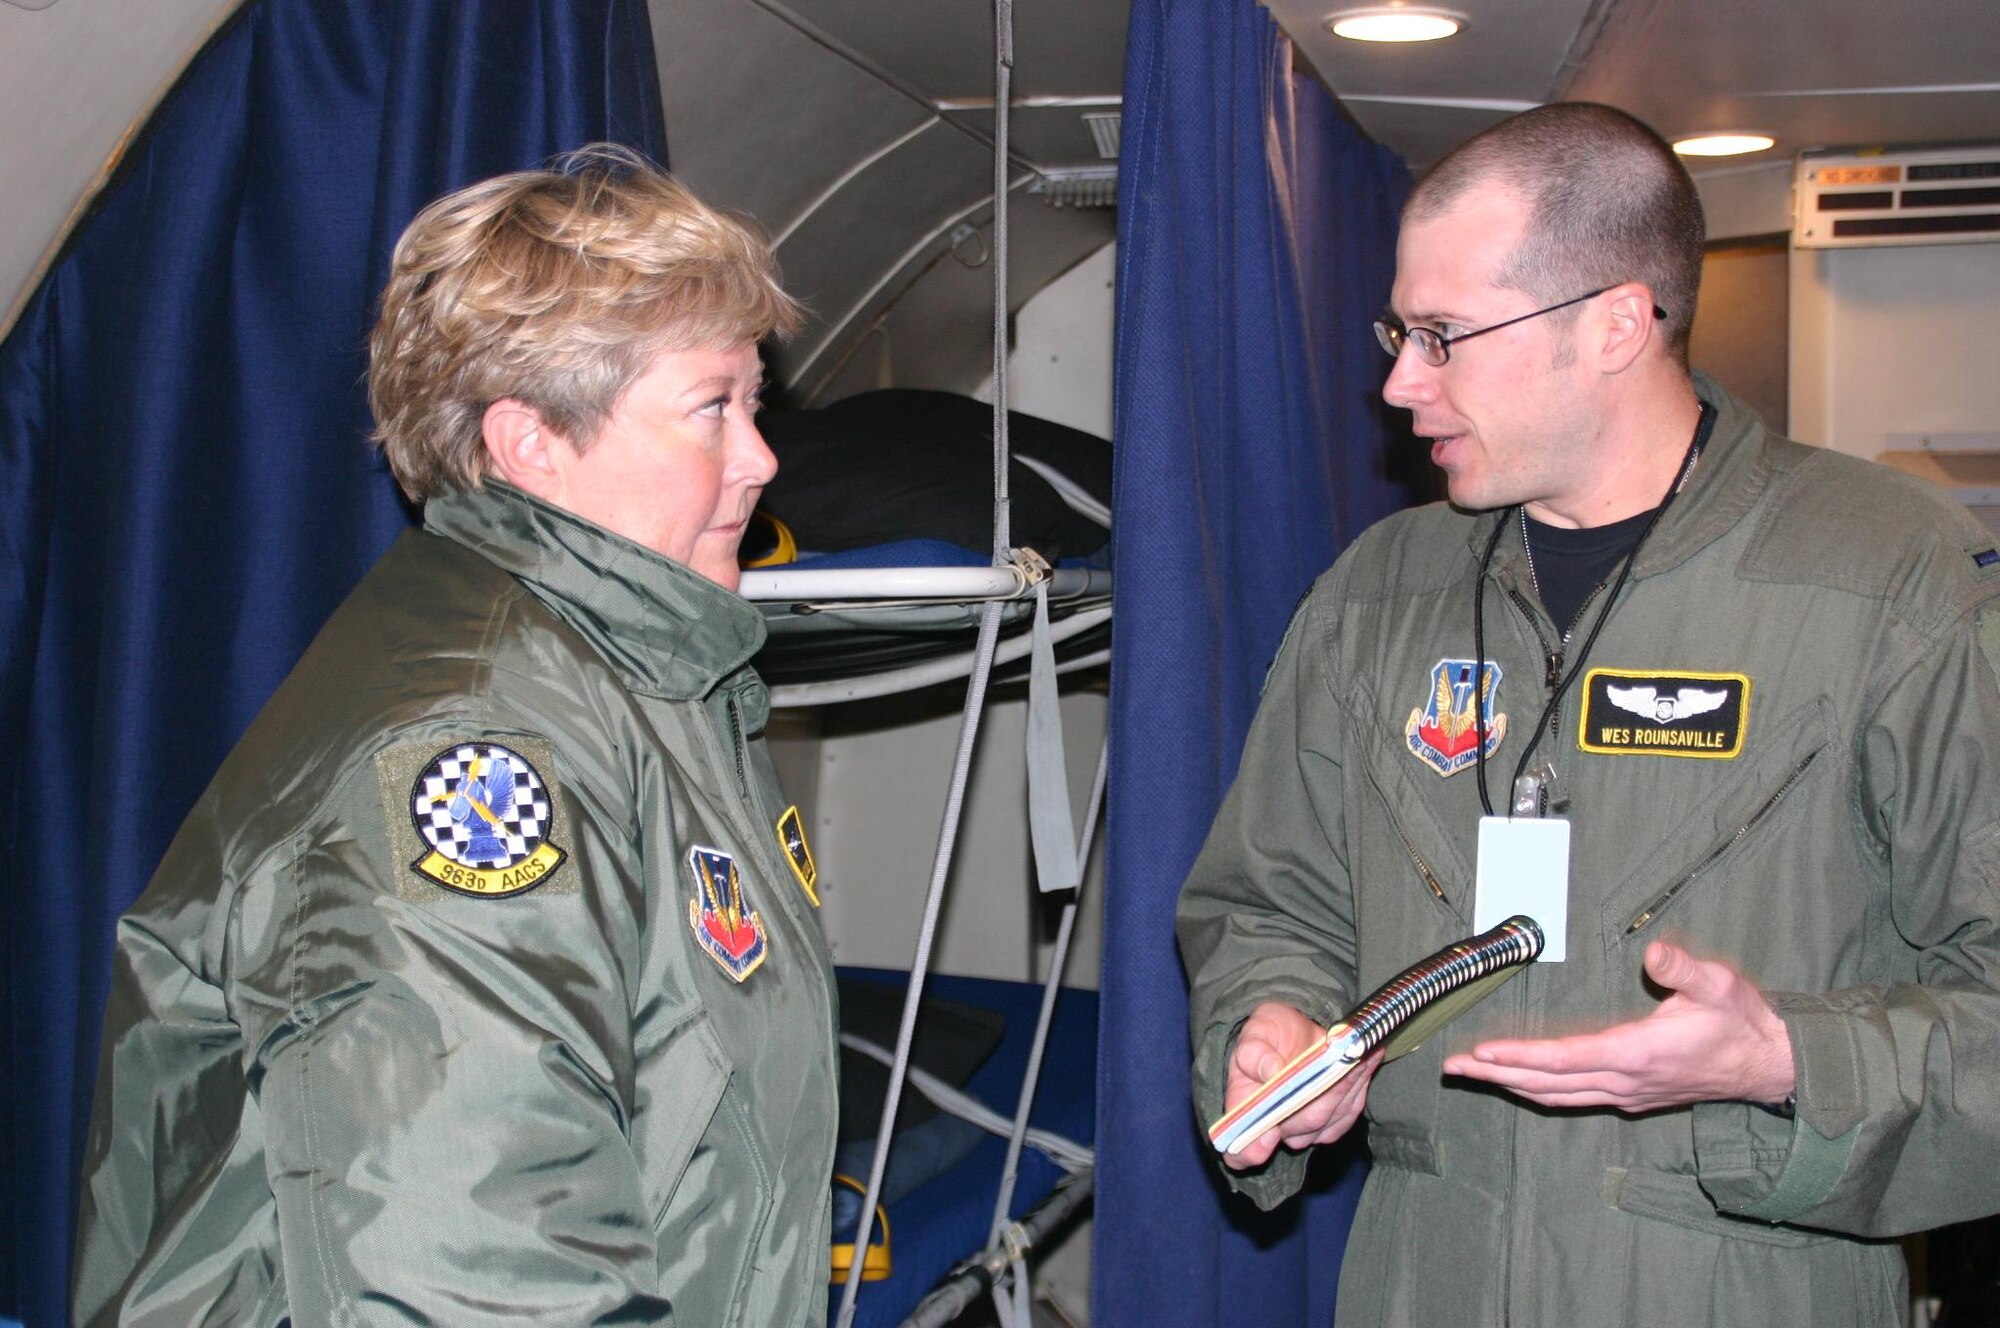 Oklahoma Lt. Gov. Jari Askins listens to the passenger brief from 1st Lt. Wes Rounsaville, air battle manager, 963rd Airborne Air Control Squadron, before her orientation flight on the E-3 Sentry Wednesday. The 552nd Air Control Wing is responsible for the operations, maintenance, logistics, training and combat support of E-3 Sentry AWACS aircraft and combat-ready Control and Reporting Centers in support of combatant commanders. The wing provides combat-ready theater battle management forces at the direction of the Chairman of the Joint Chiefs of Staff. It operates and supports these forces worldwide ensuring combat capability for all peacetime and contingency operations. (Air Force photo/1st Lt. Kinder Blacke)